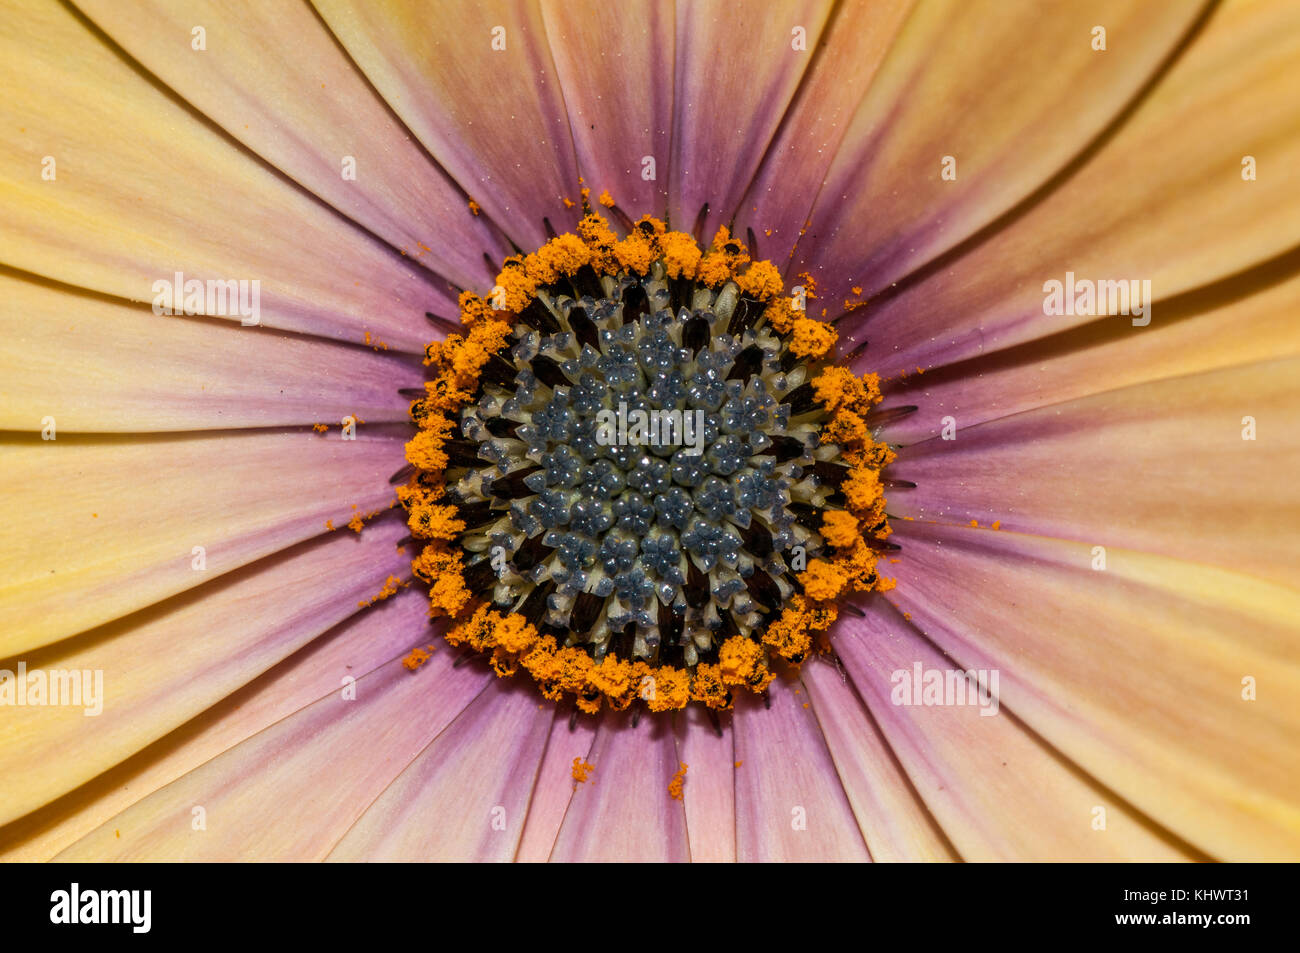 close-up view of a daisy flower (Dimorphotheca calendulacea) Stock Photo